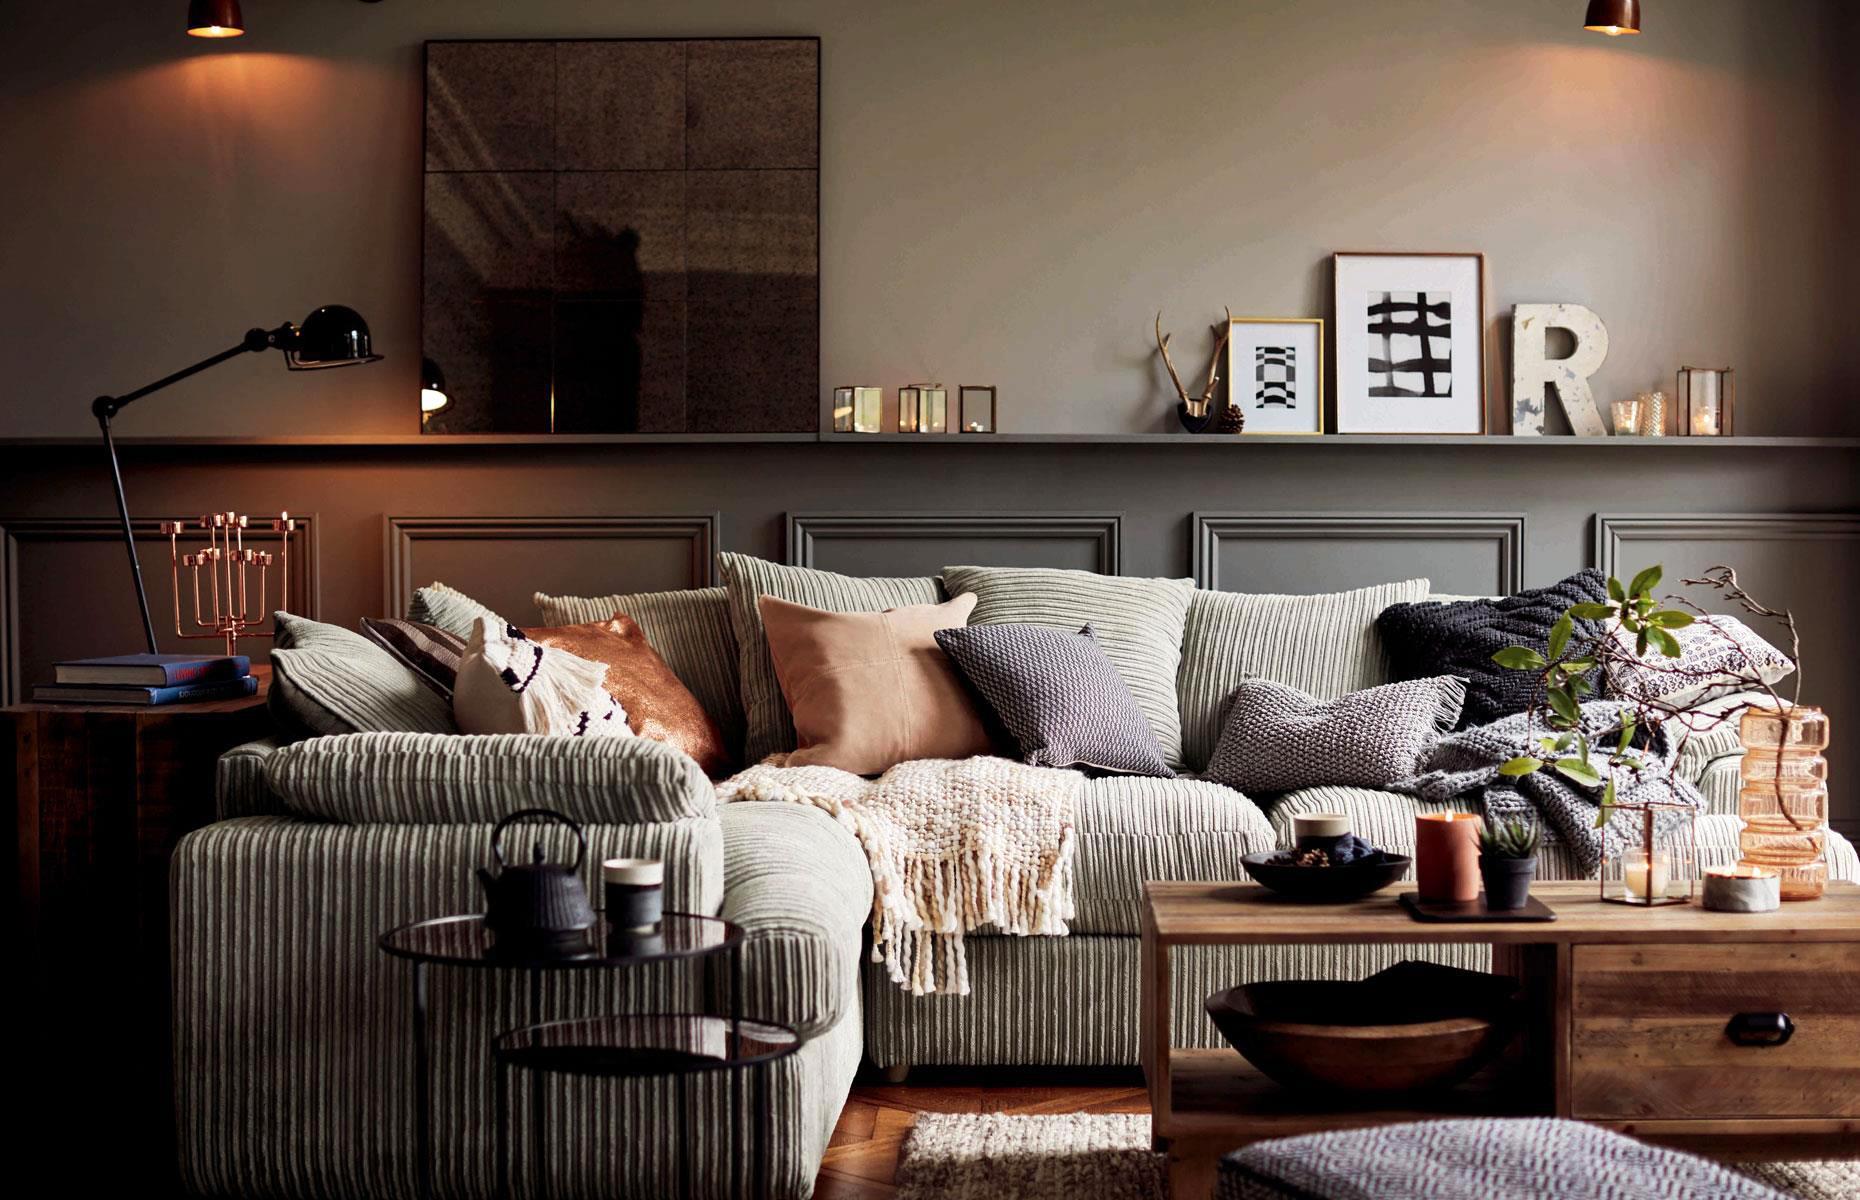 Autumn Interior Design: 10 Tips to Cozy Up Your Living Space